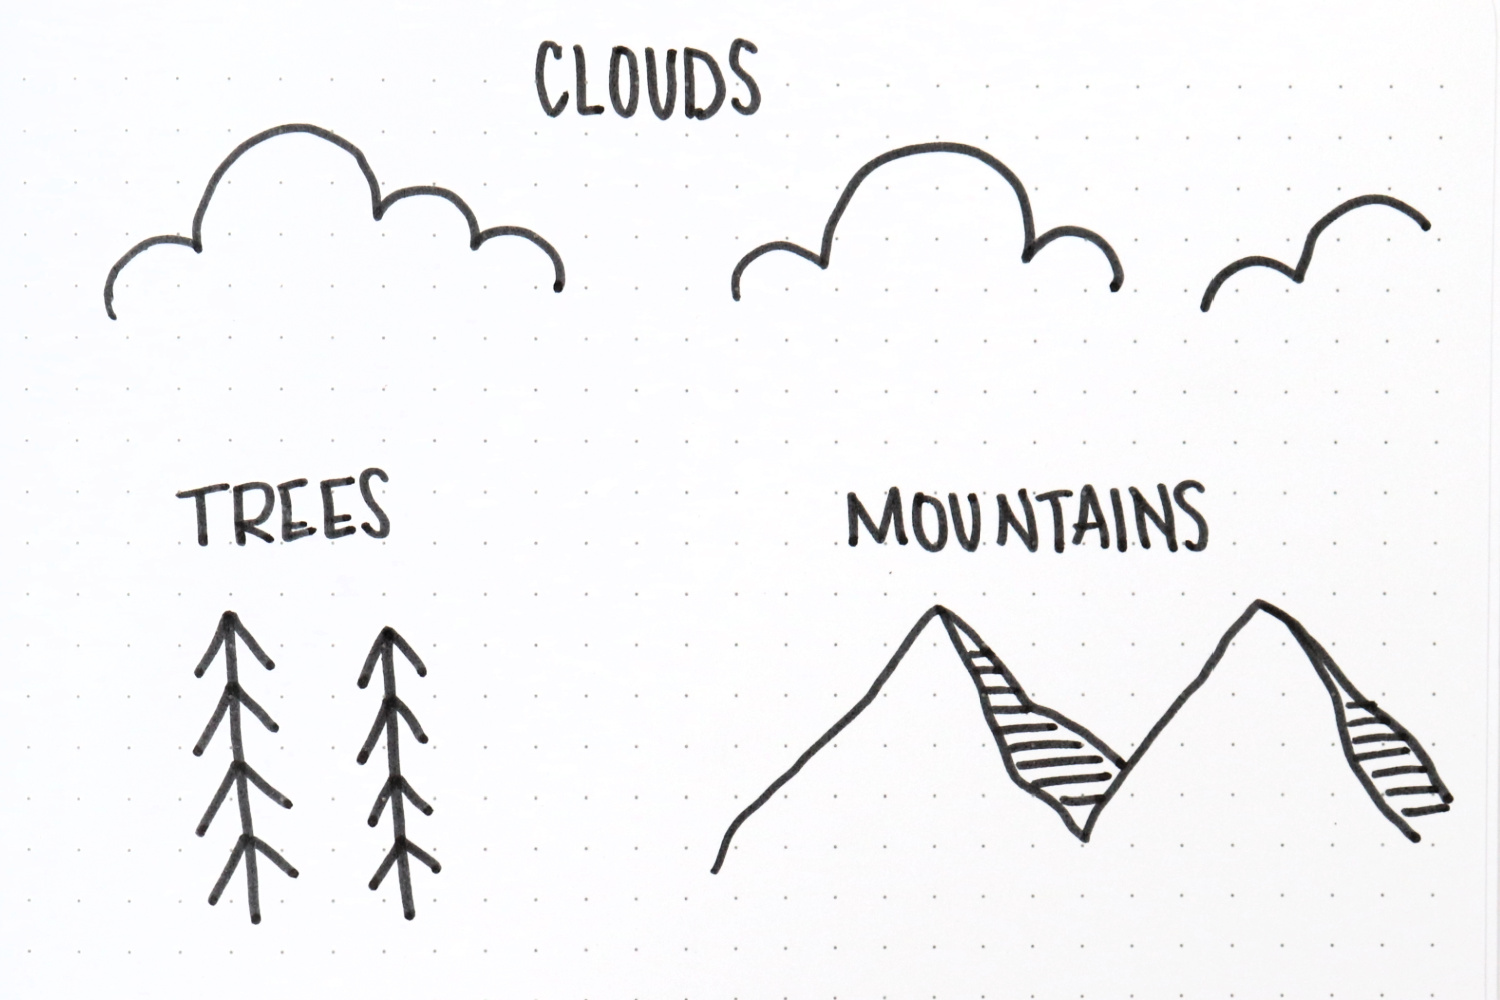 Image illustrates monoline drawings of clouds, trees, and mountains.